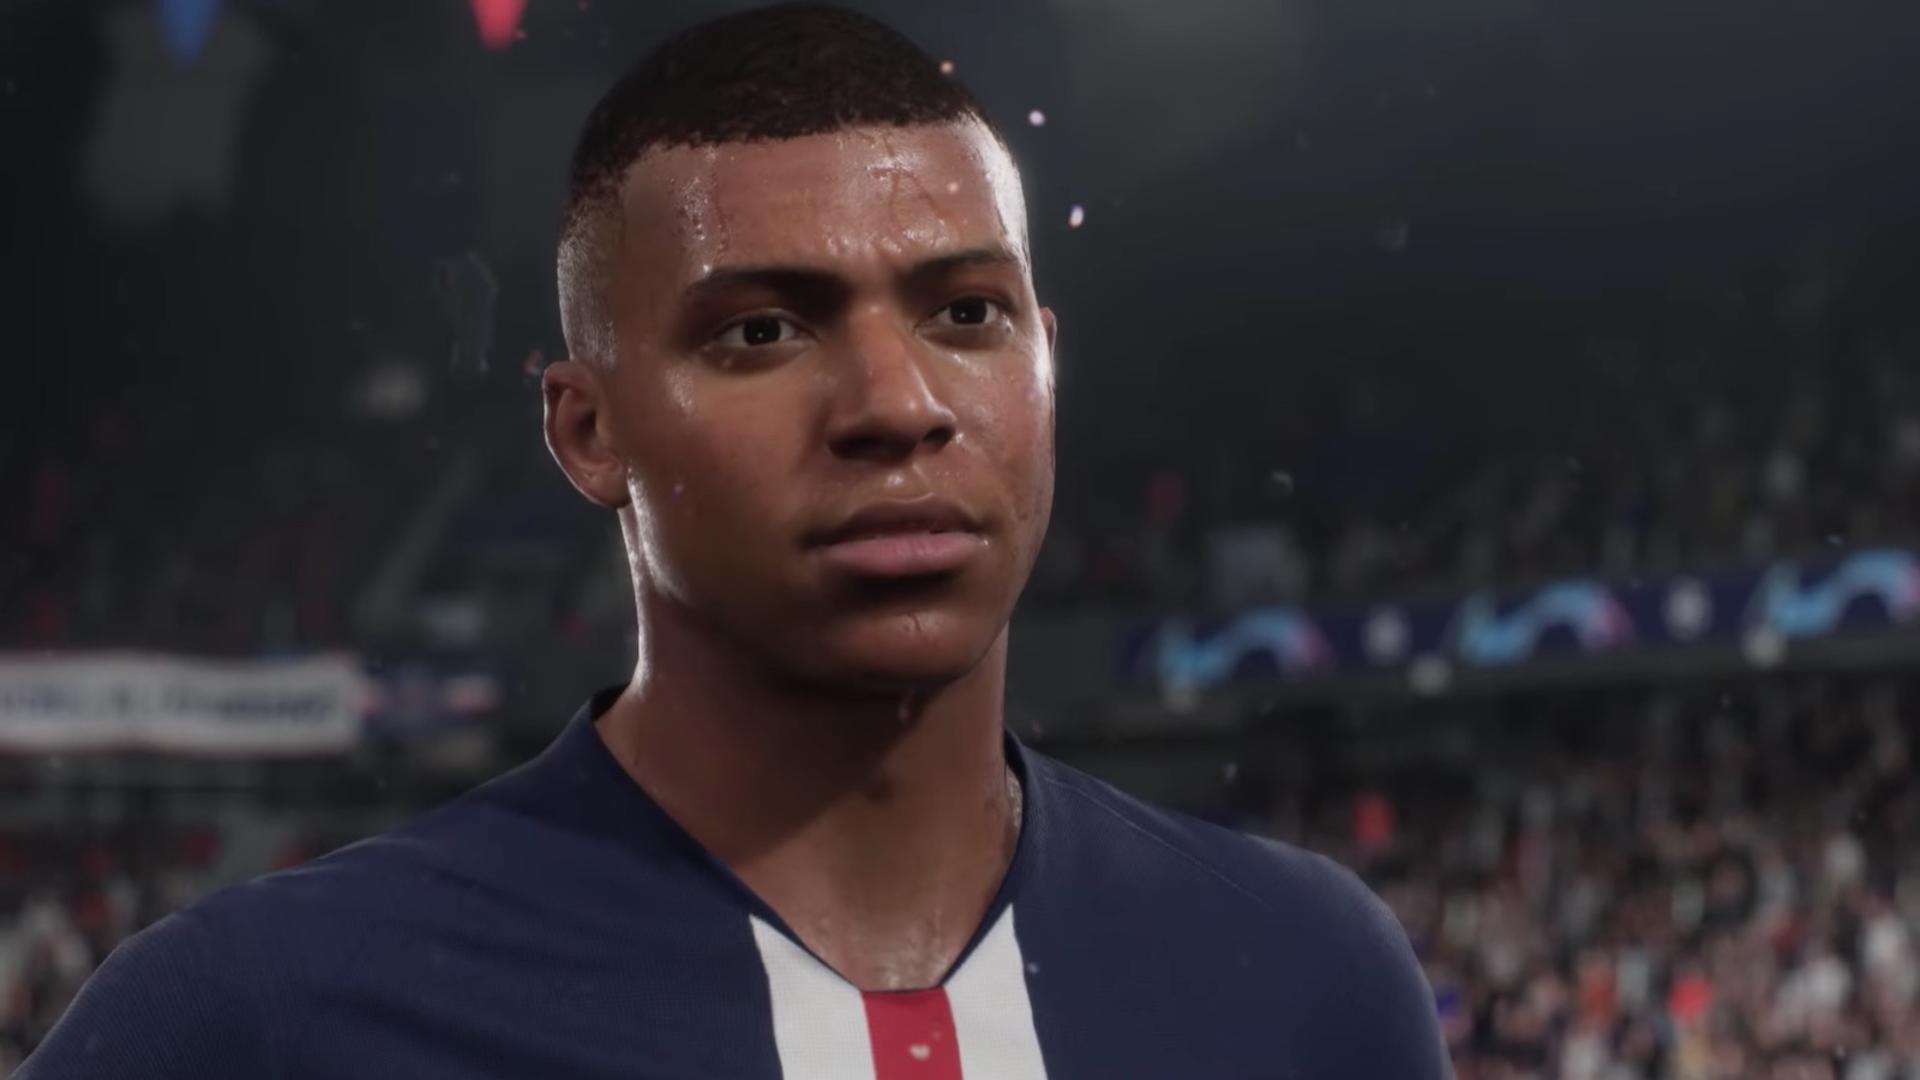 FIFA 21 Will Have A Next Gen Carryover Plan Similar To Madden's